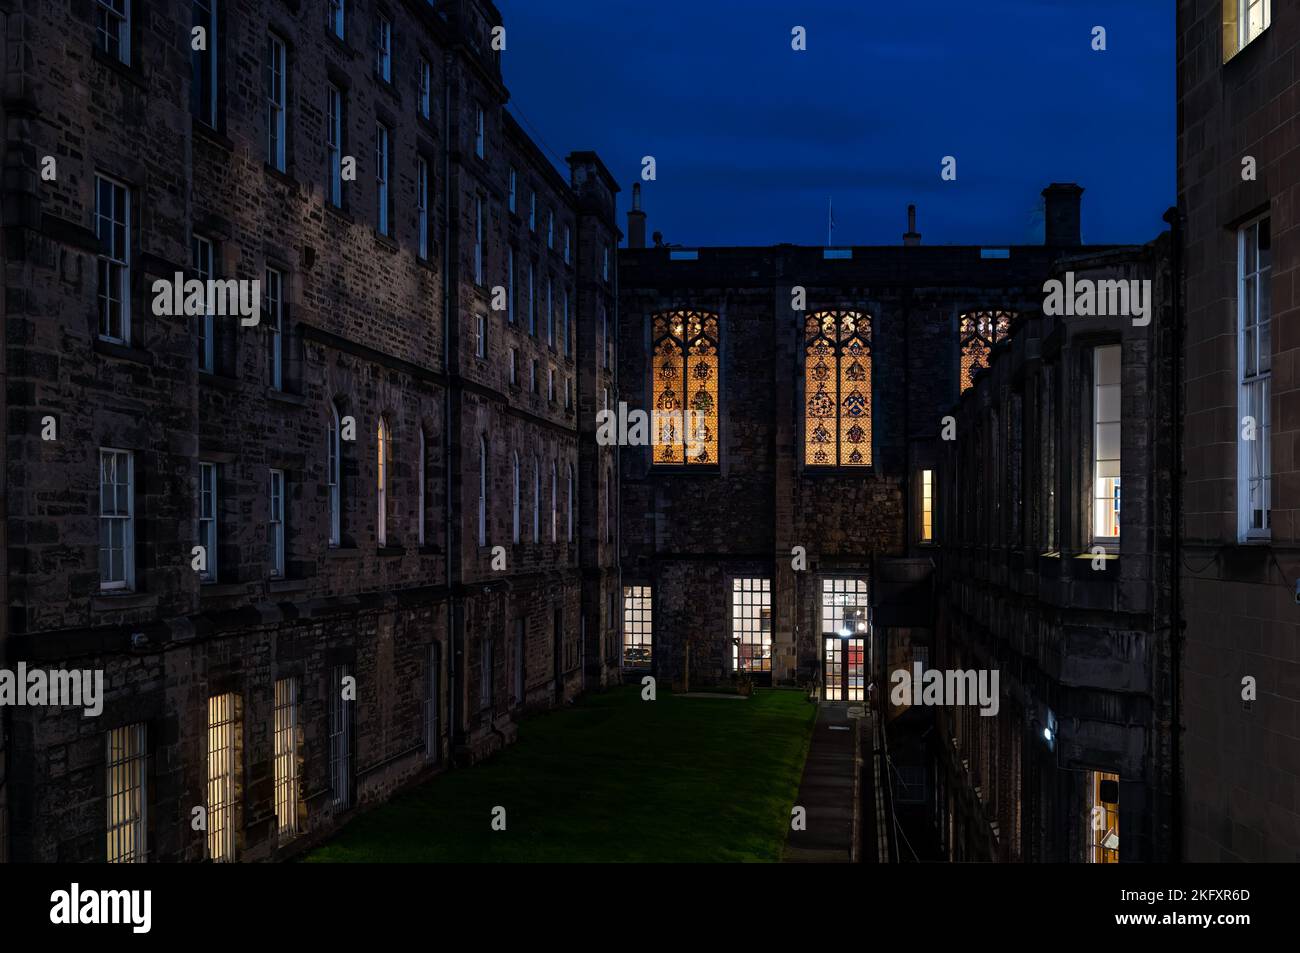 Exterior view of stained glass windows at night, Parliament Hall, Court of Session, Edinburgh, Scotland, UK Stock Photo